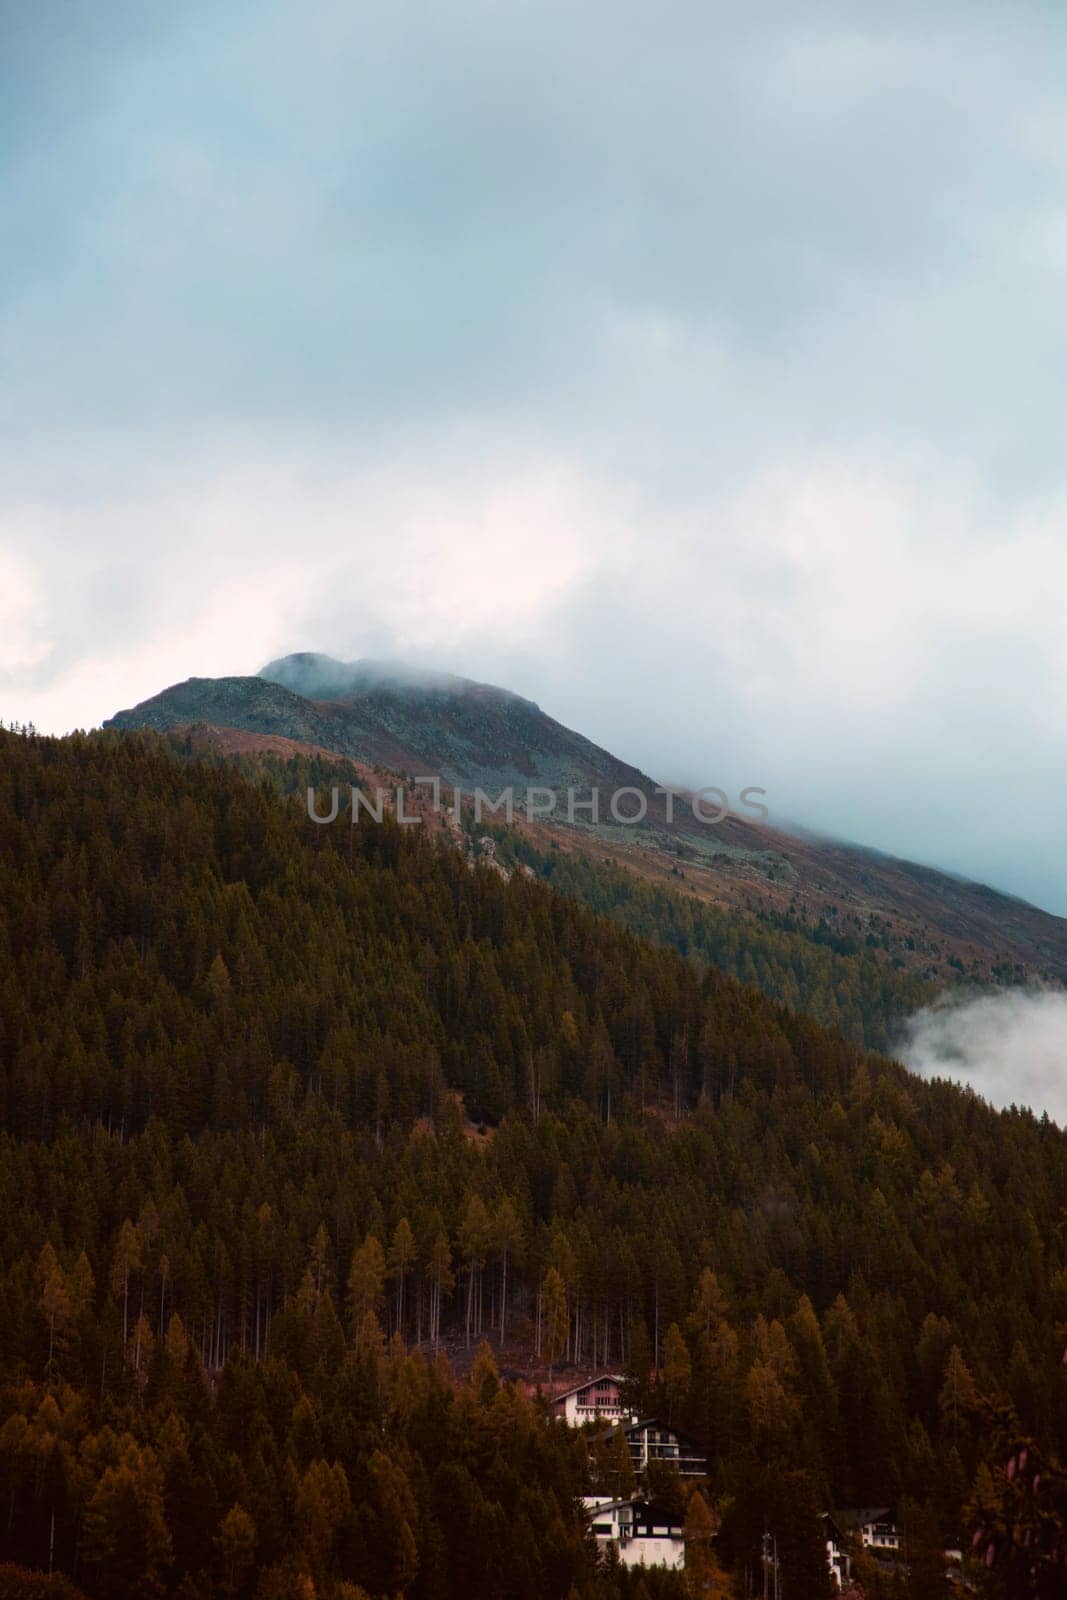 Alpine Serenity: A Mist-Clad Mountain Peaking Above a Lush Forest with a Village at its Base. High quality photo